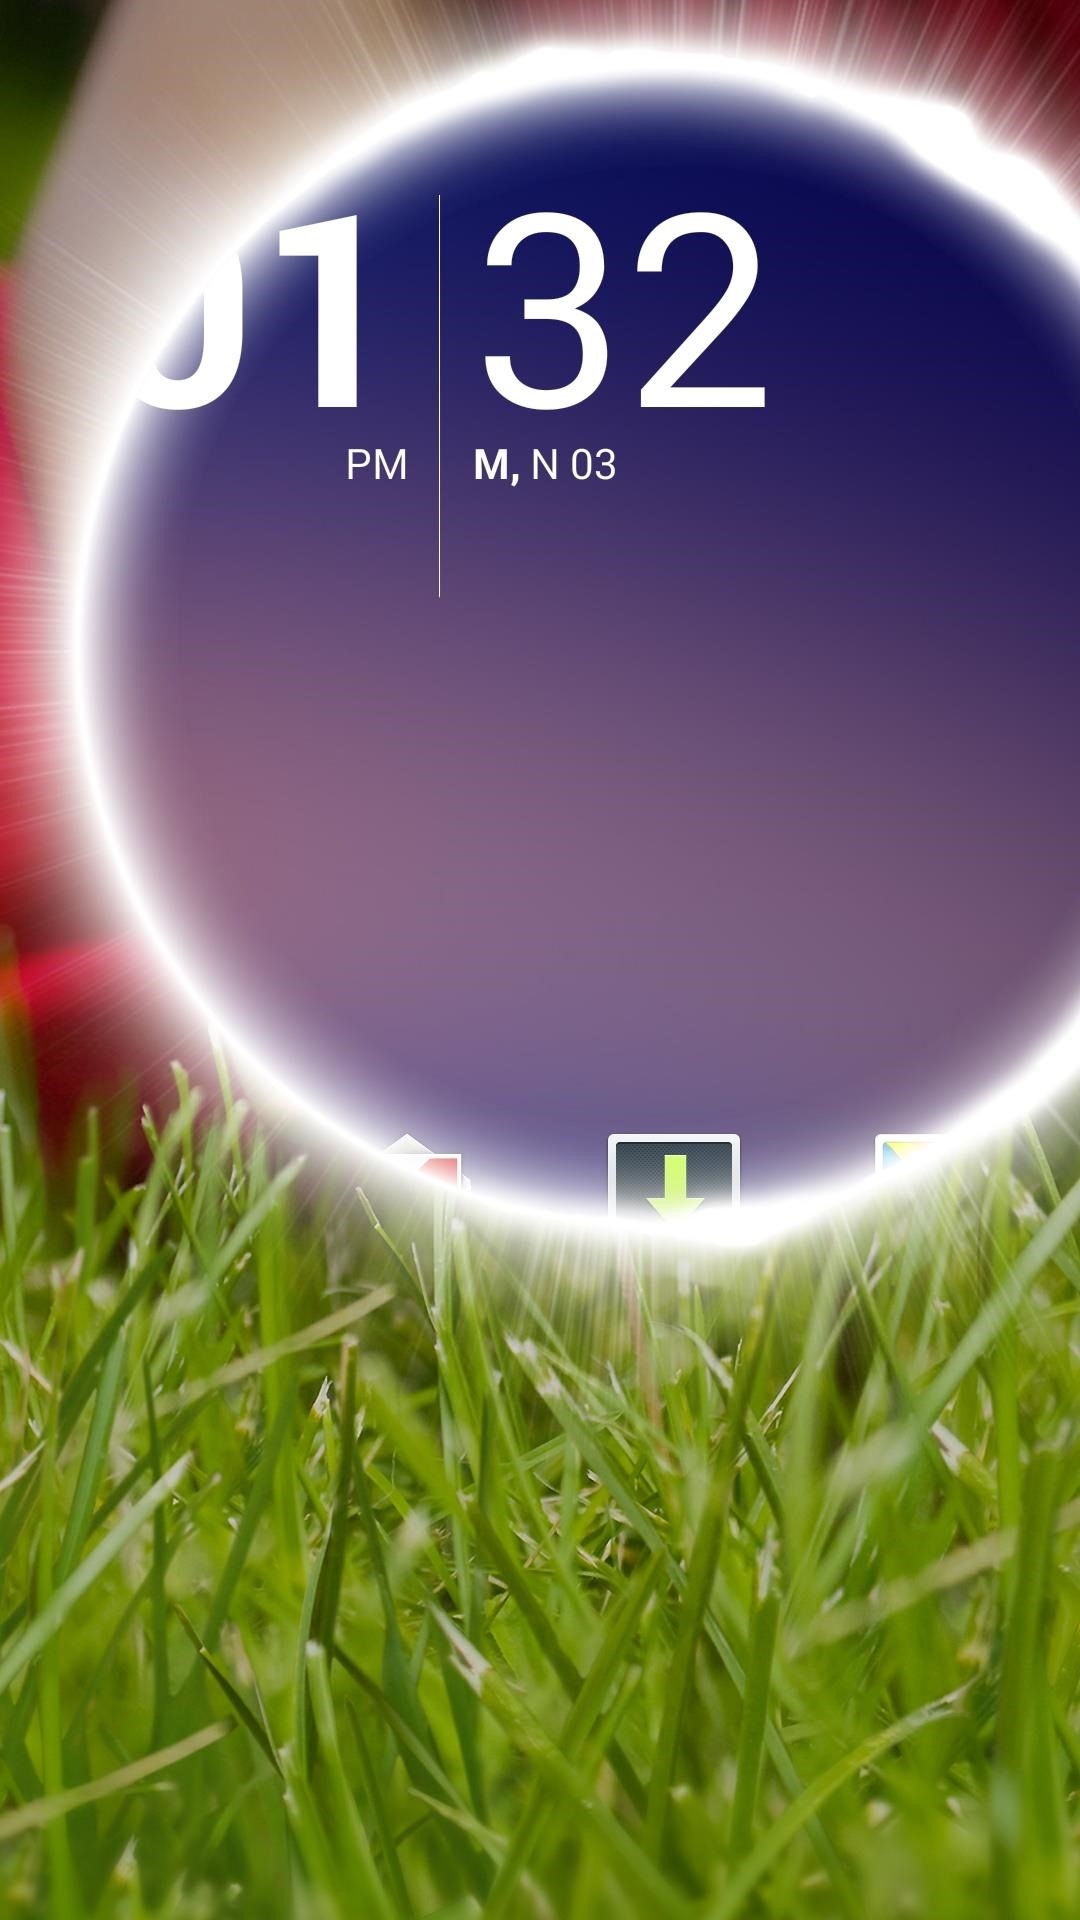 Customize Your Android Lock Screen with New Unlock Effects & Customizations